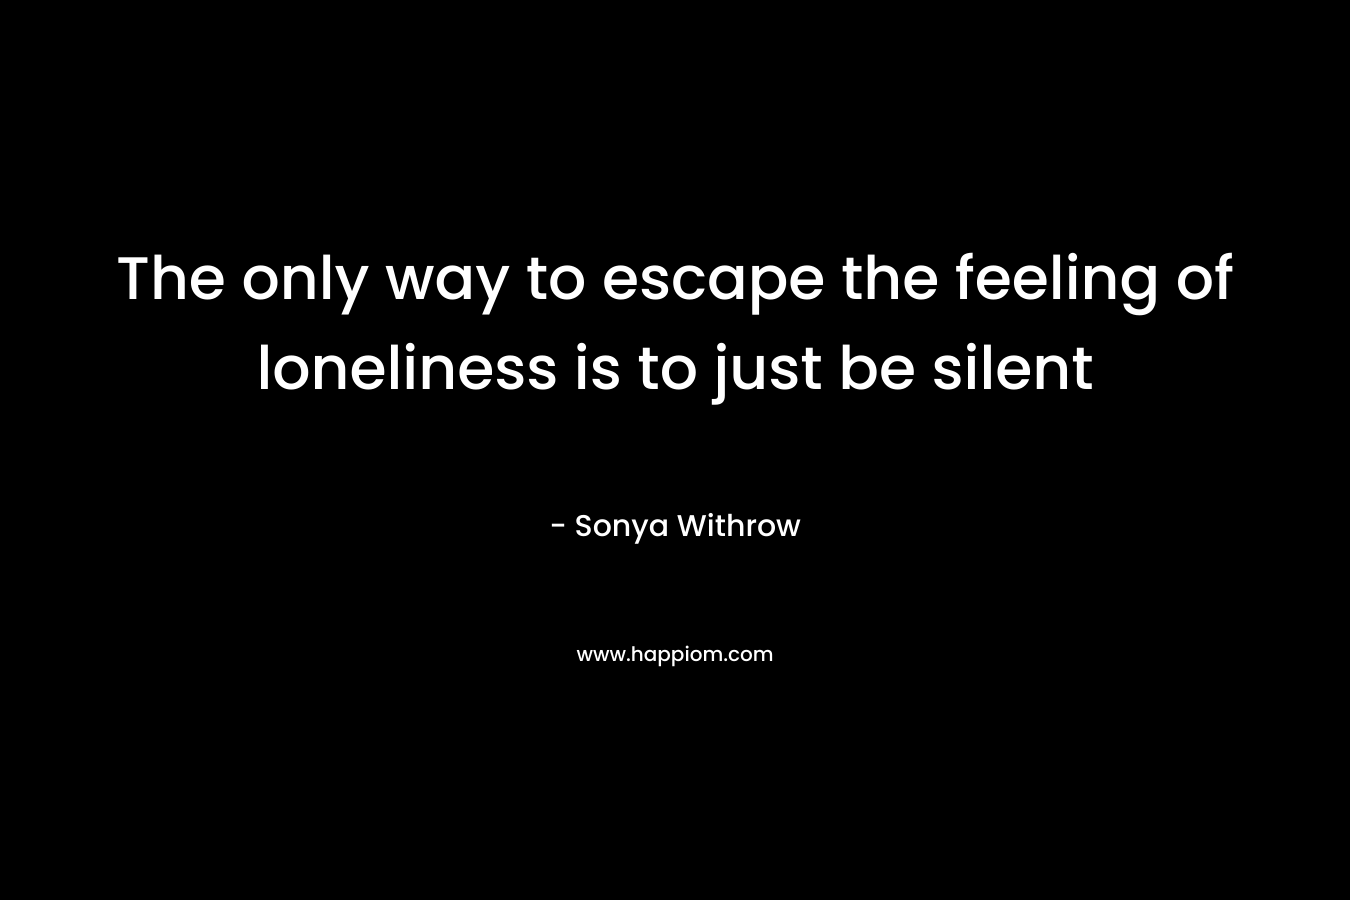 The only way to escape the feeling of loneliness is to just be silent